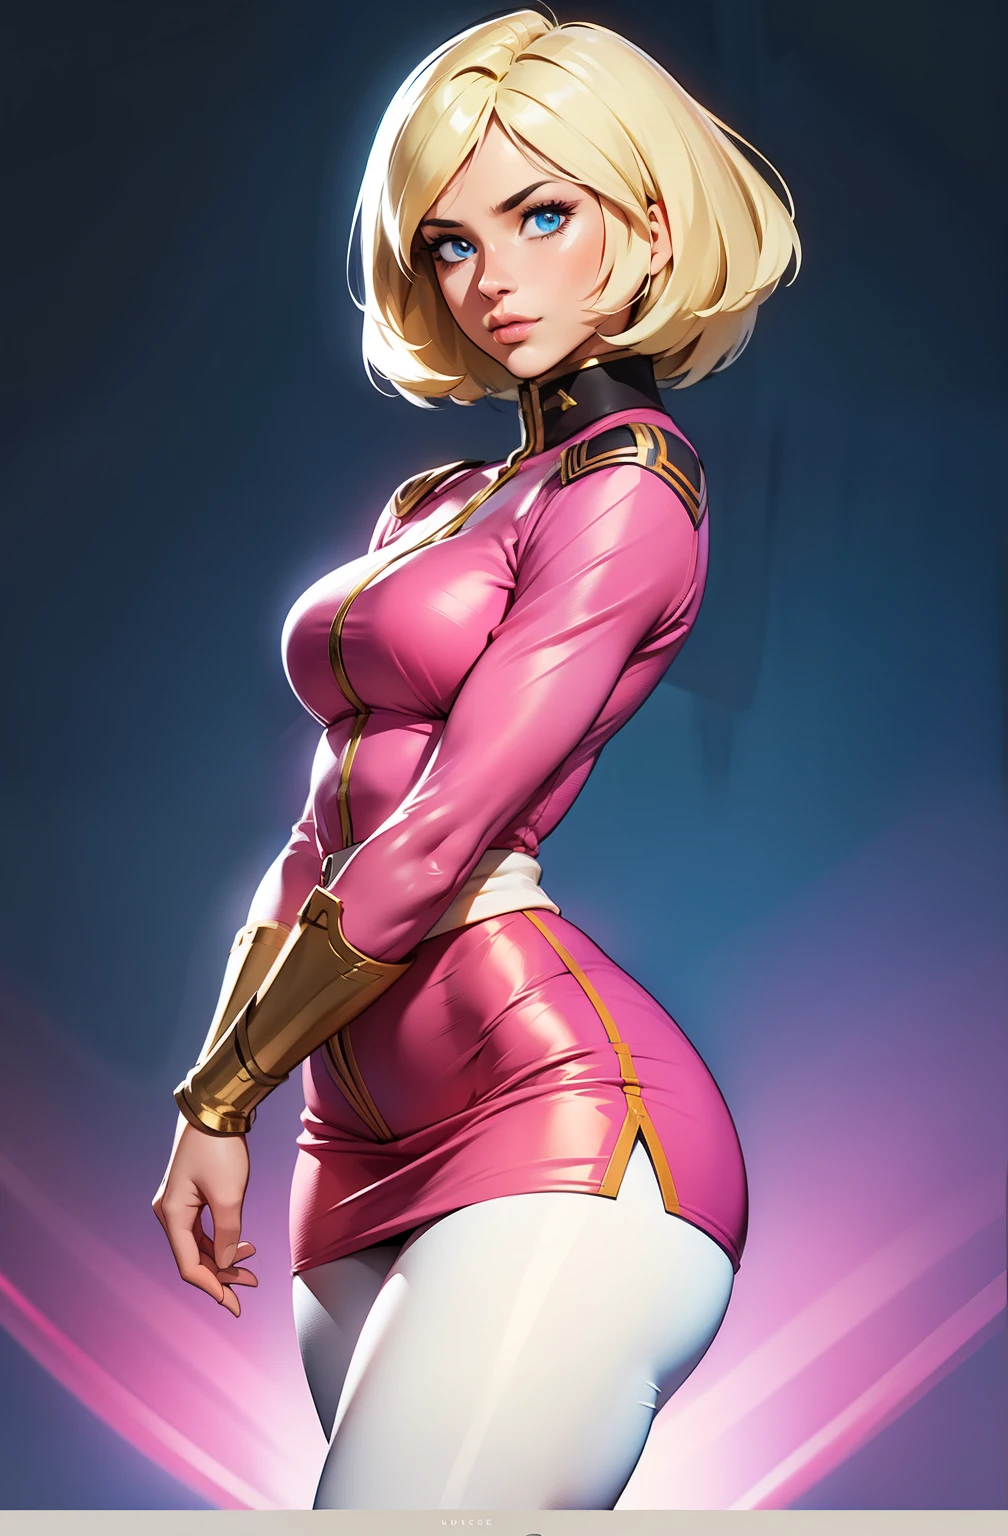 ((masterpiece)), ((cinematic lighting)), realistic photo、Real Images、Top image quality、1girl in, sayla mass, Elegant, masterpiece, Convoluted, slim arms, wide hips, thick thighs, thigh gaps, Best Quality, absurderes, high face detail, Perfect eyes, mature, Cowboy Shot, , Vibrant colors, soft pink uniform, soft pink Skirt, white tights, side view, looking at viewer